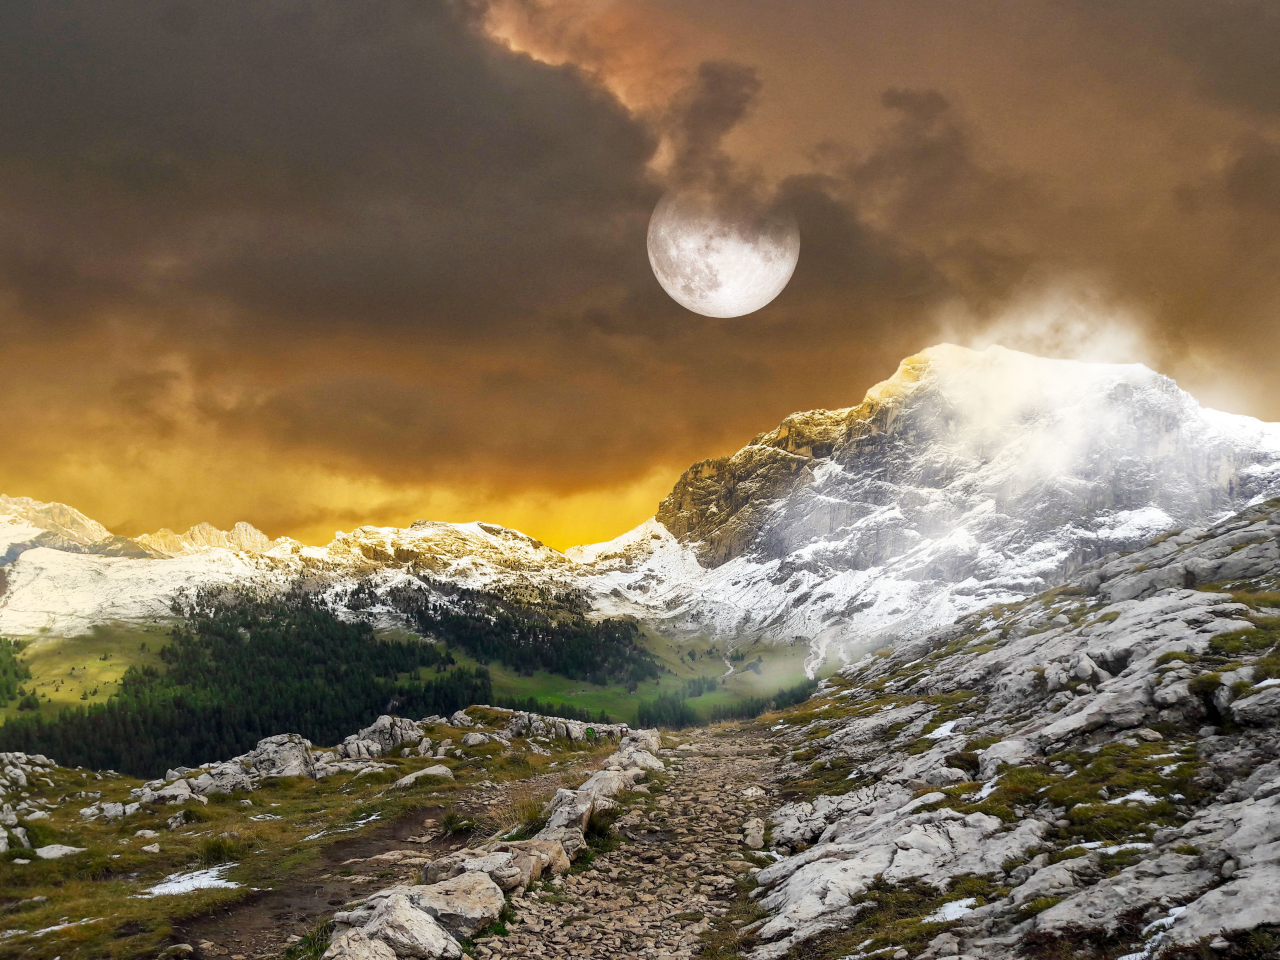 mountains, landscape, full moon, hiking, trail pathway, snow